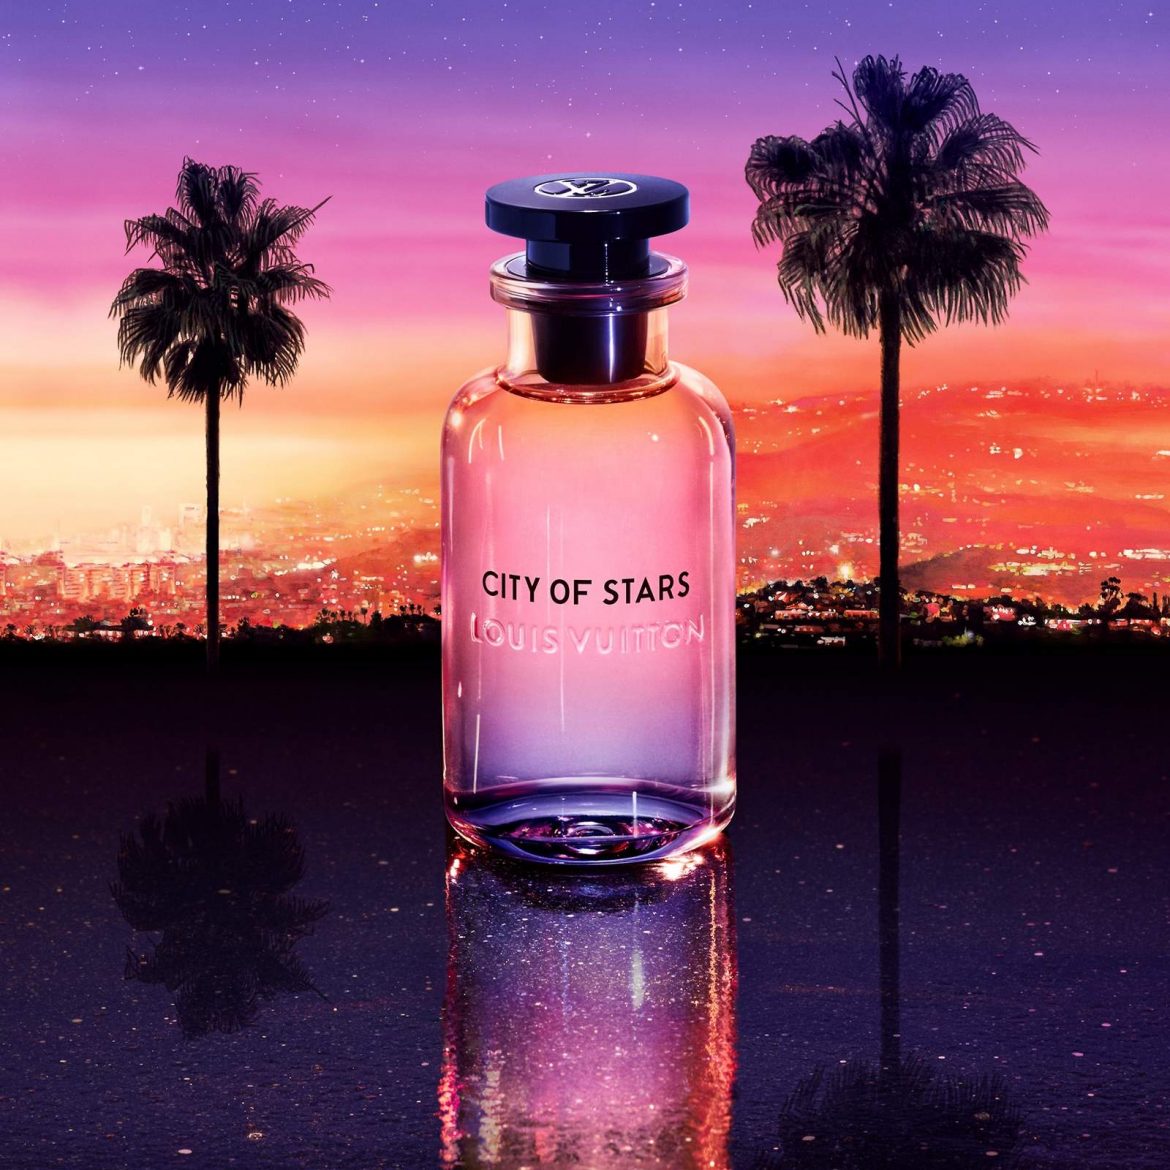 City of Stars is Louis Vuitton's ode to Los Angeles from dusk to dawn